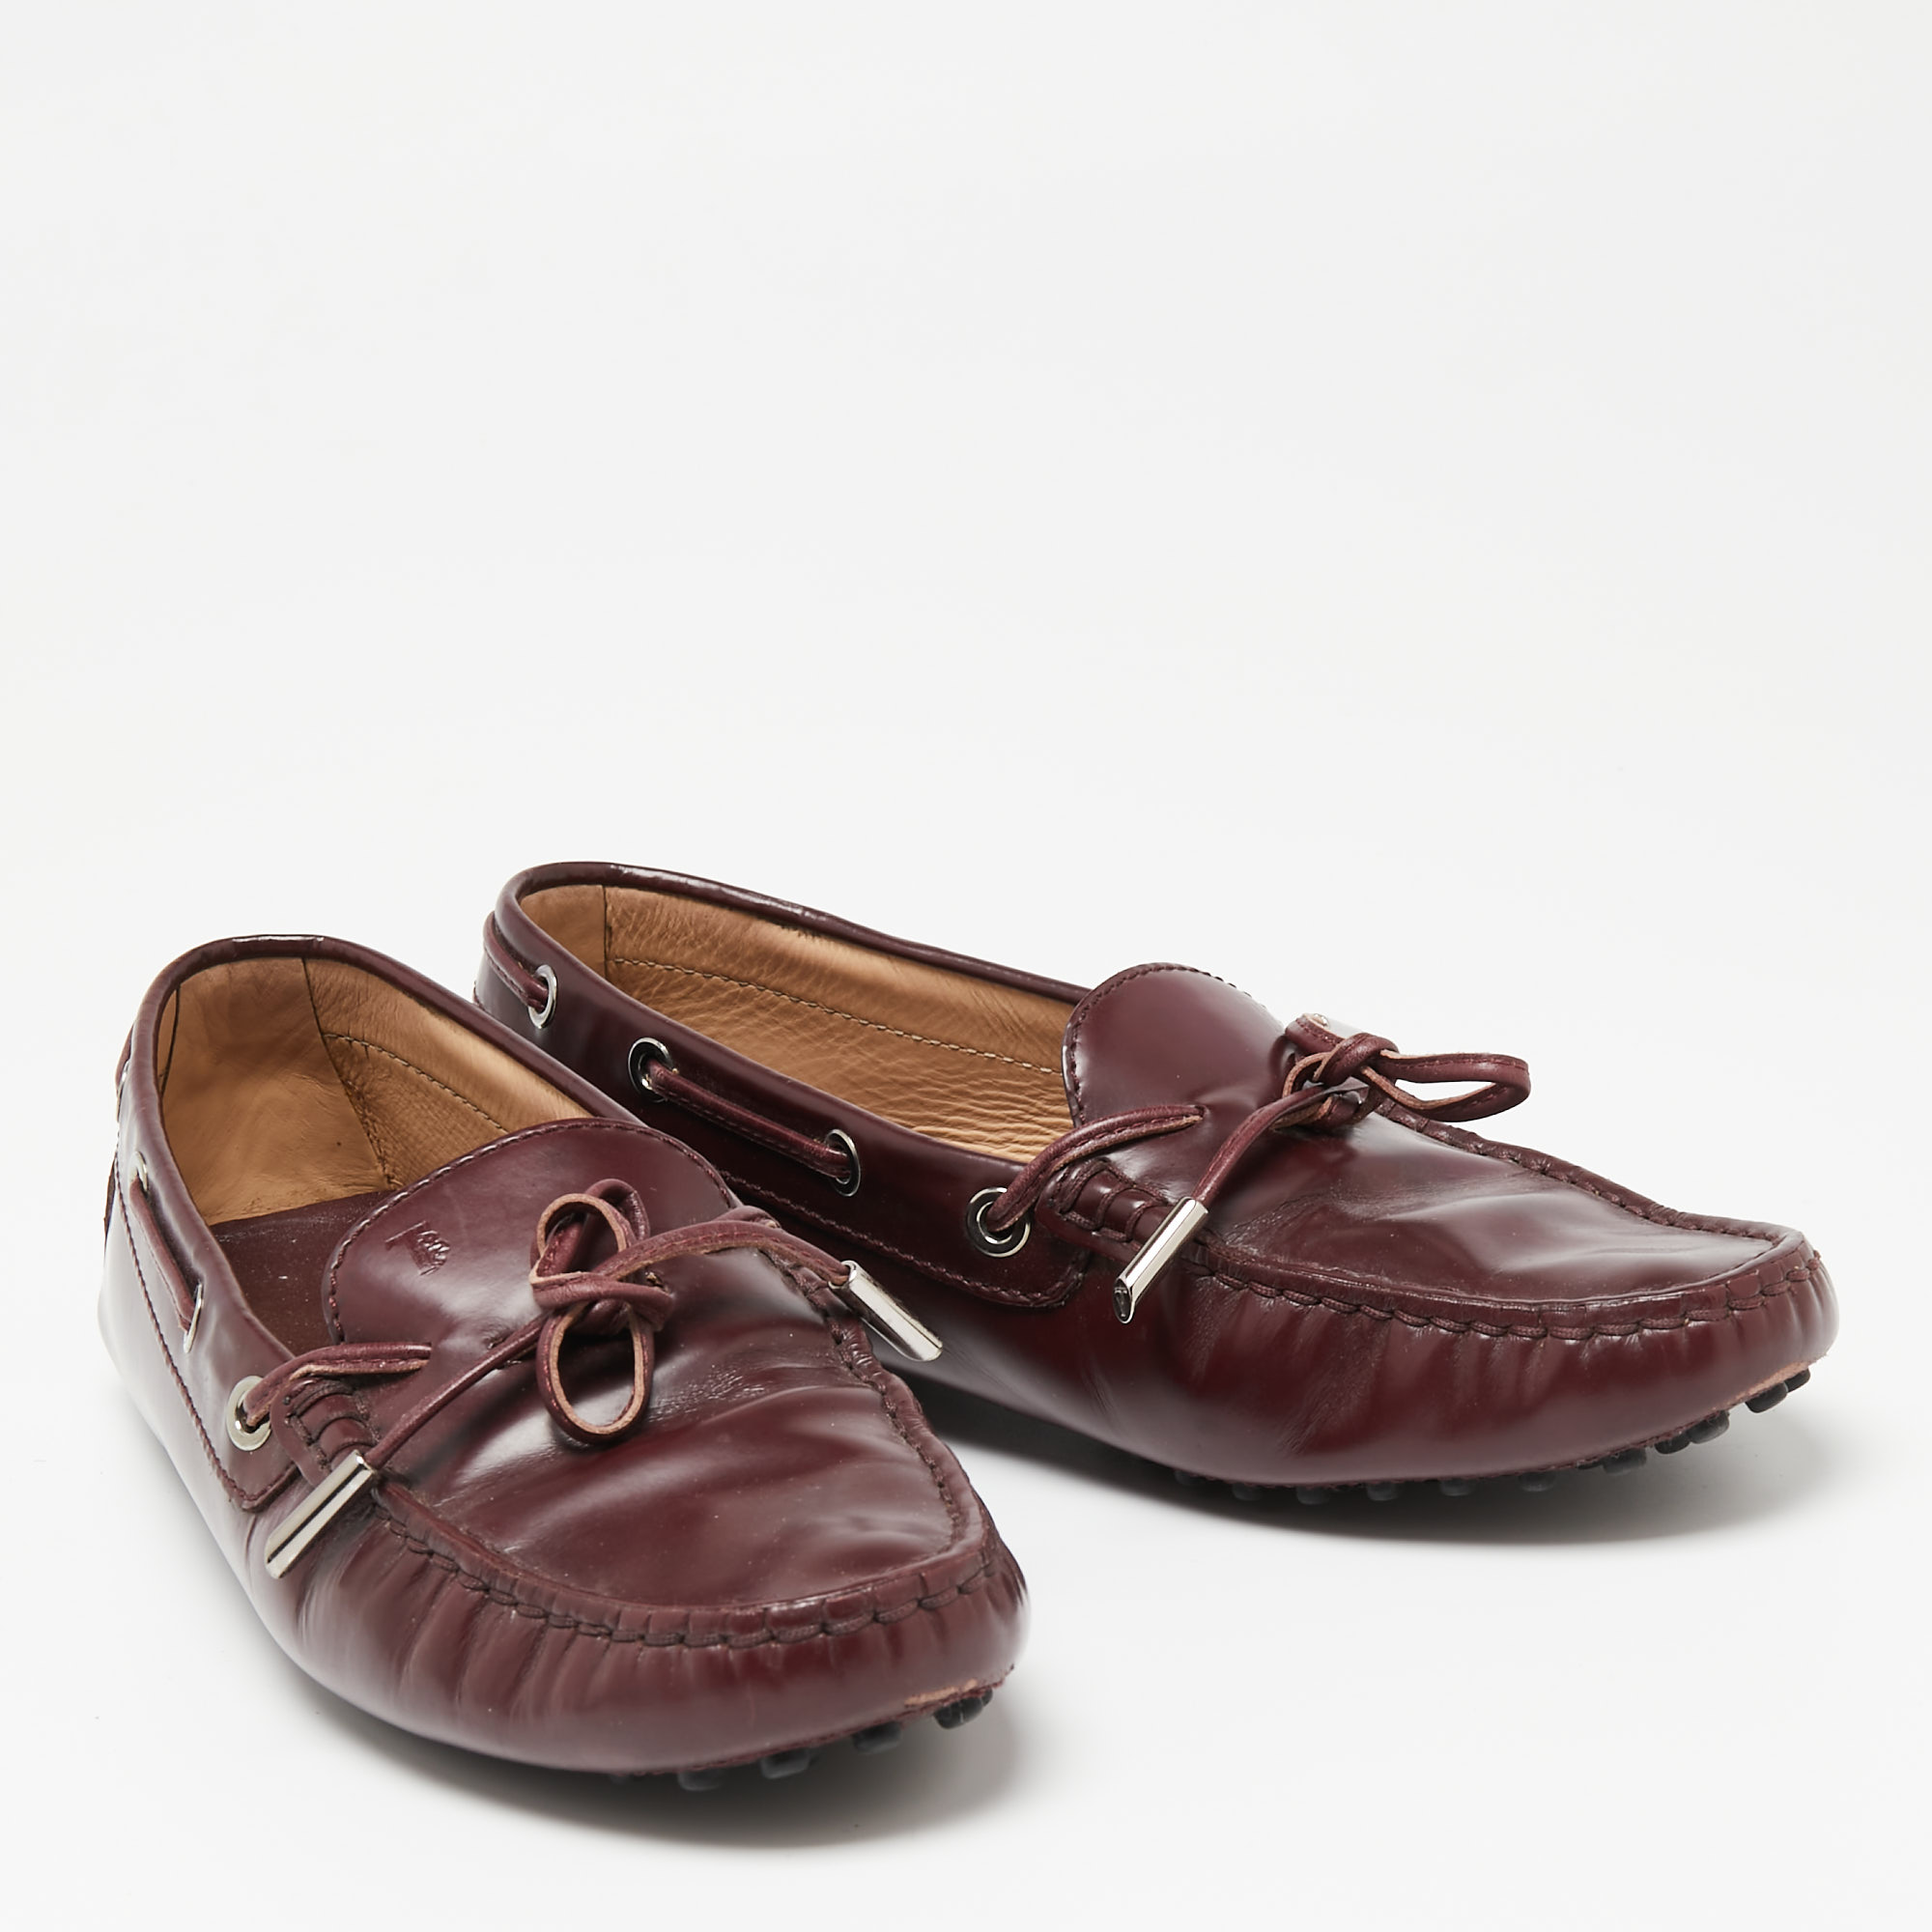 Tod's Burgundy Leather Bow Slip-On Loafers Size 37.5